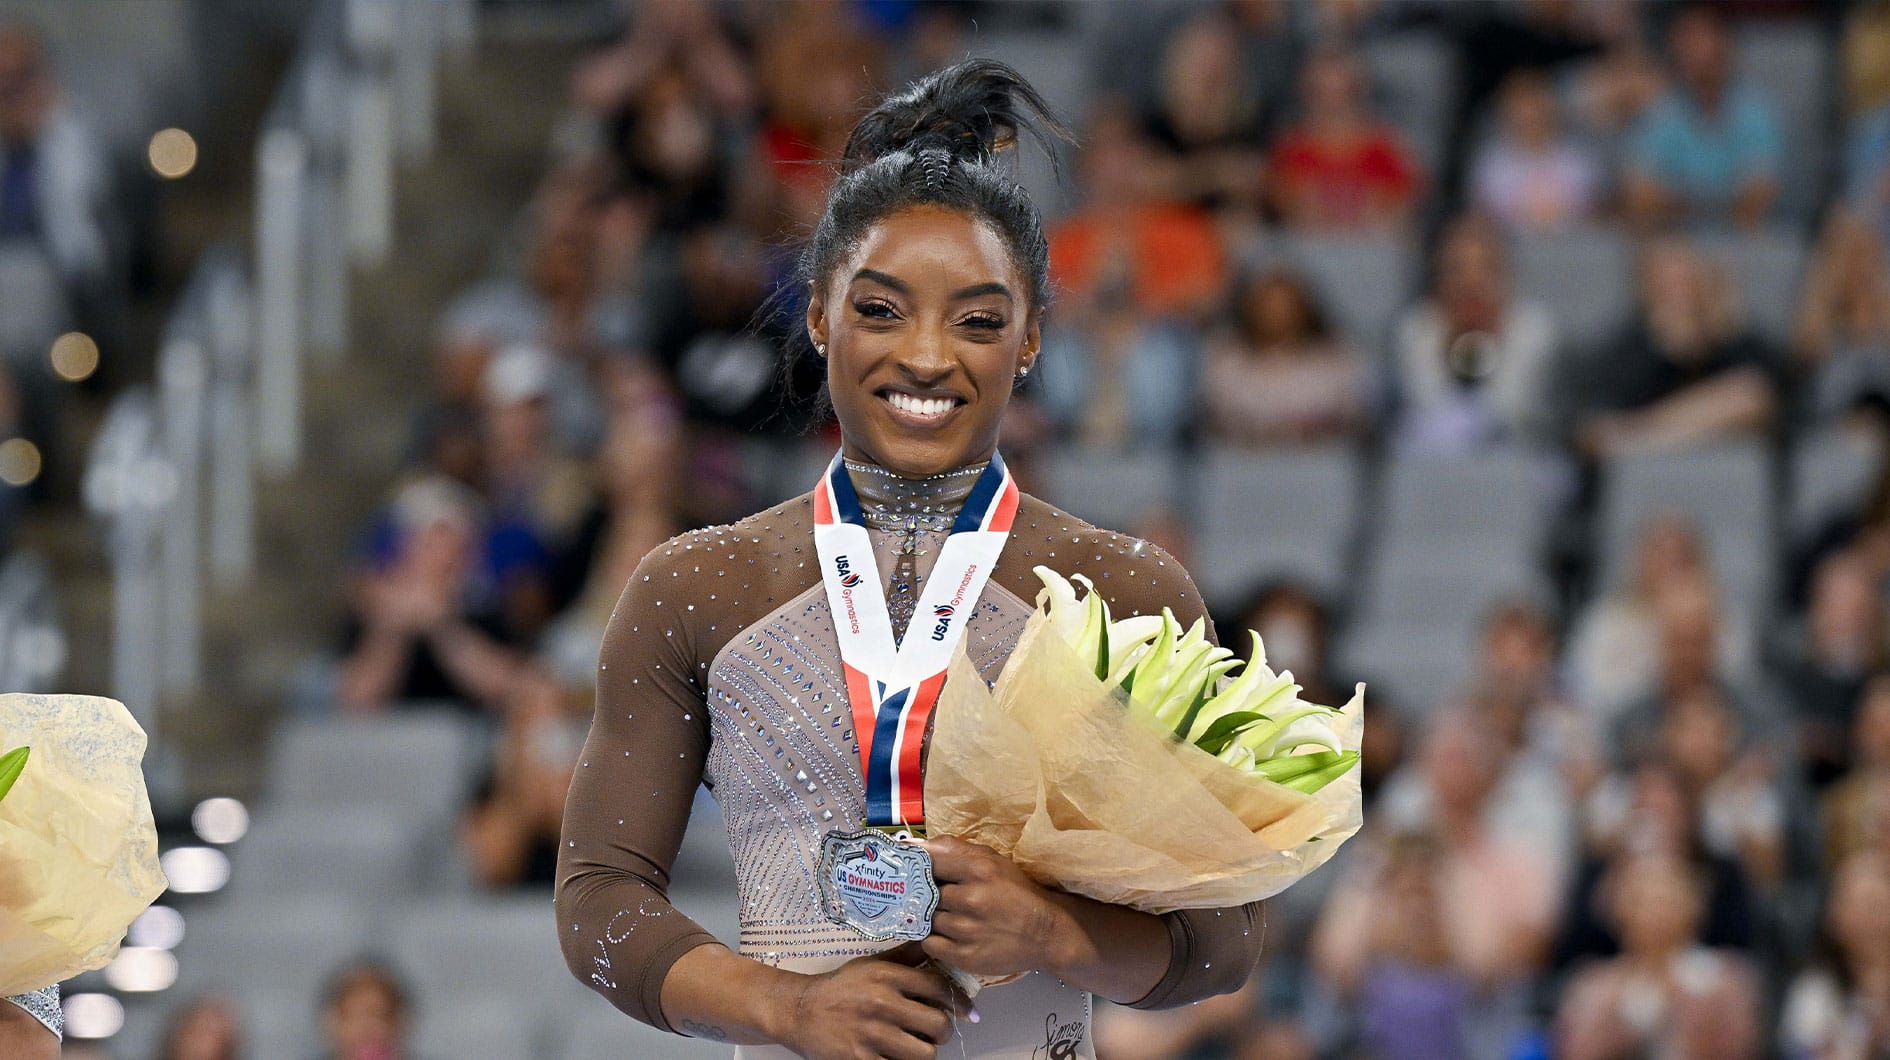 Simone Biles of World Champions Centre poses for a photo with her gold medal and commemorative belt buckle after finishing in first in the women’s 2024 Xfinity U.S. Gymnastics Championships at Dickies Arena.